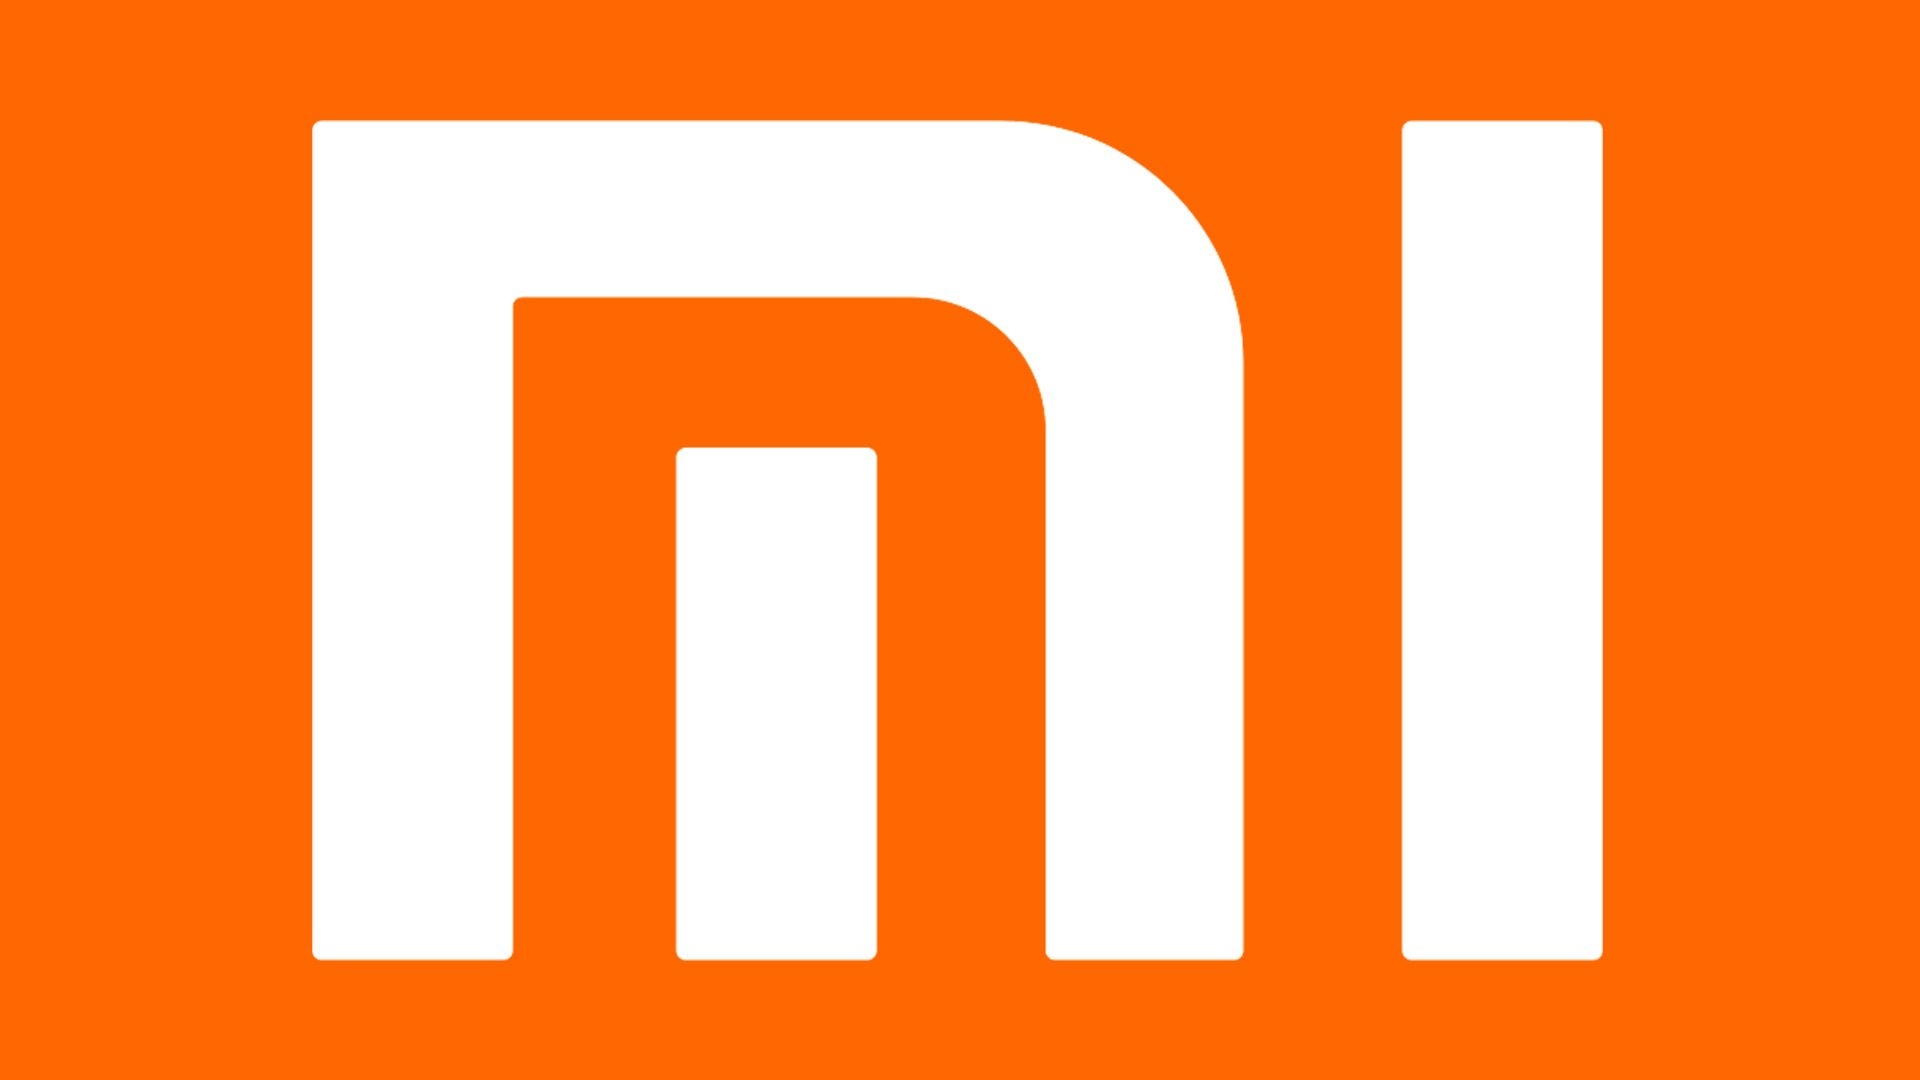 Xiaomi: The company founded in 2010, Launched its first smartphone in 2011: Mi 1. 1920x1080 Full HD Wallpaper.